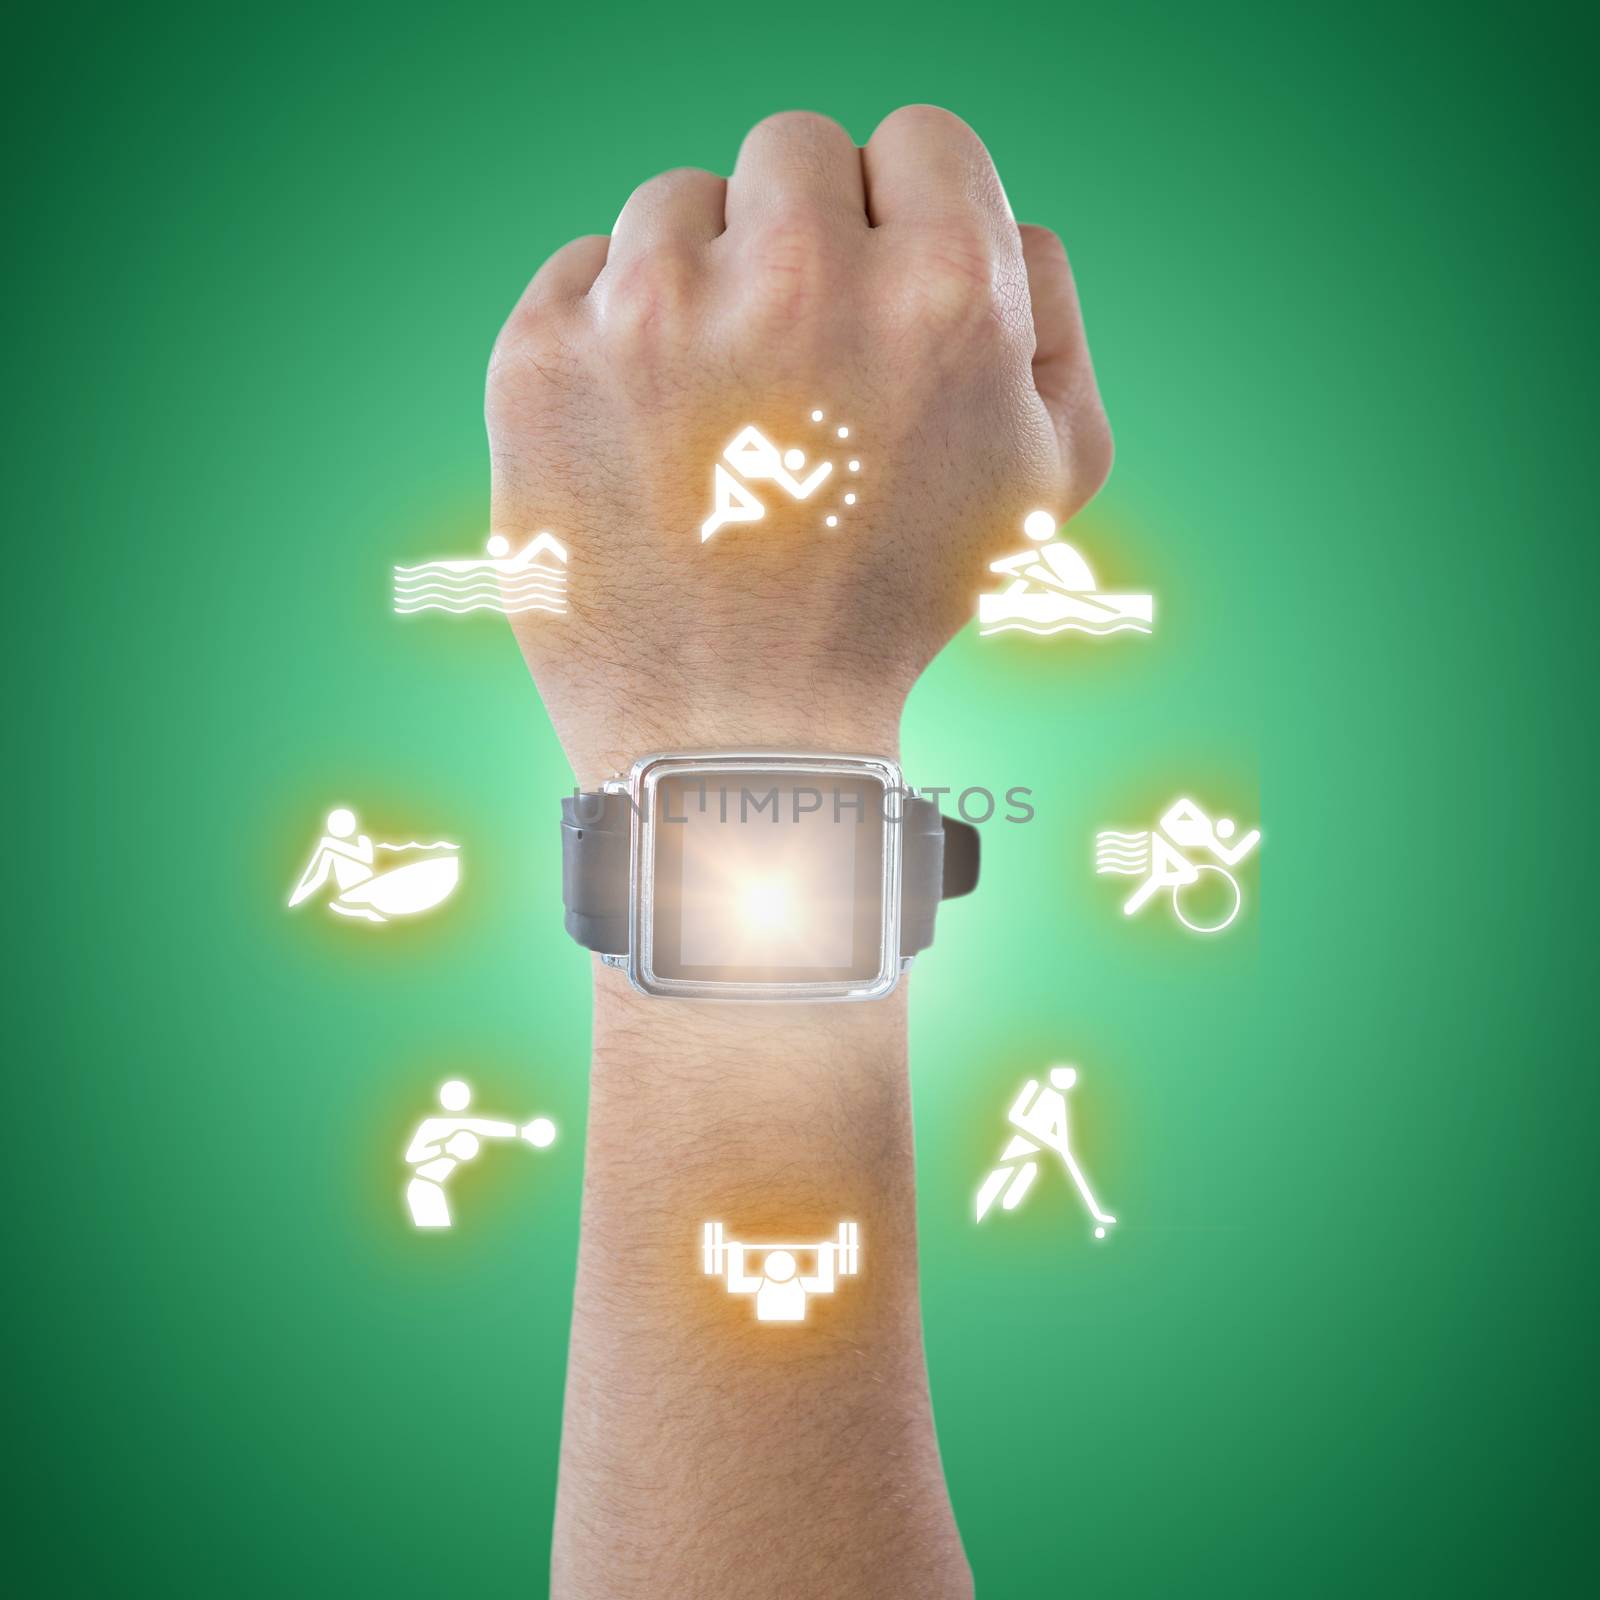 Composite image of cropped hand wearing watch by Wavebreakmedia